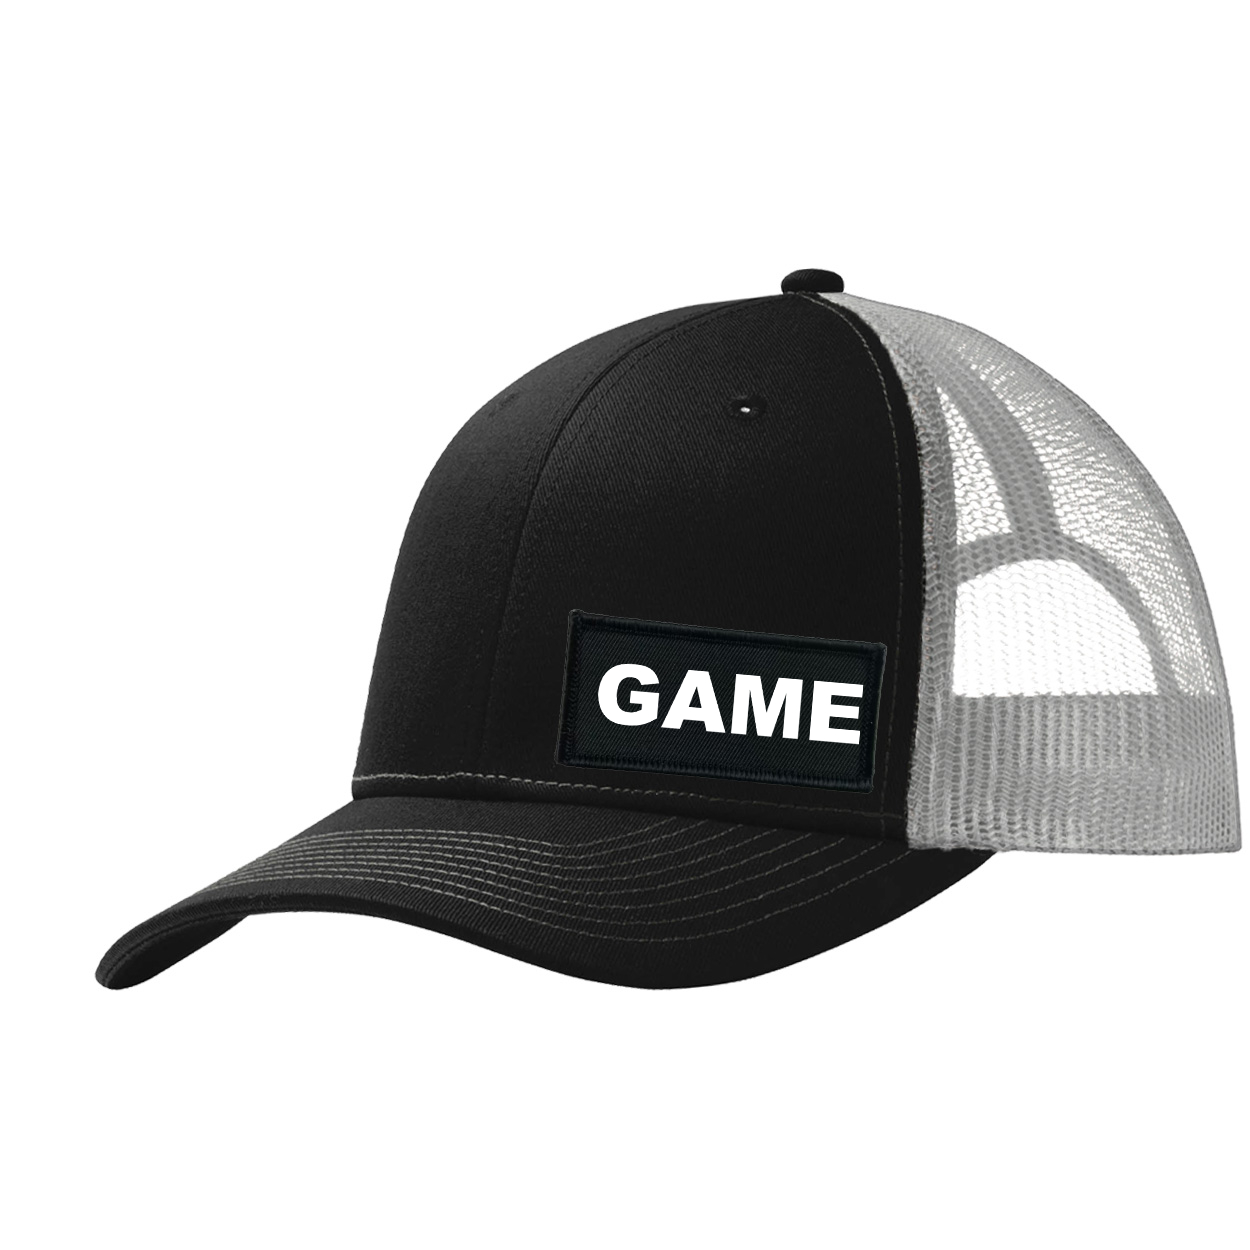 Game Brand Logo Night Out Woven Patch Snapback Trucker Hat Black/Gray 